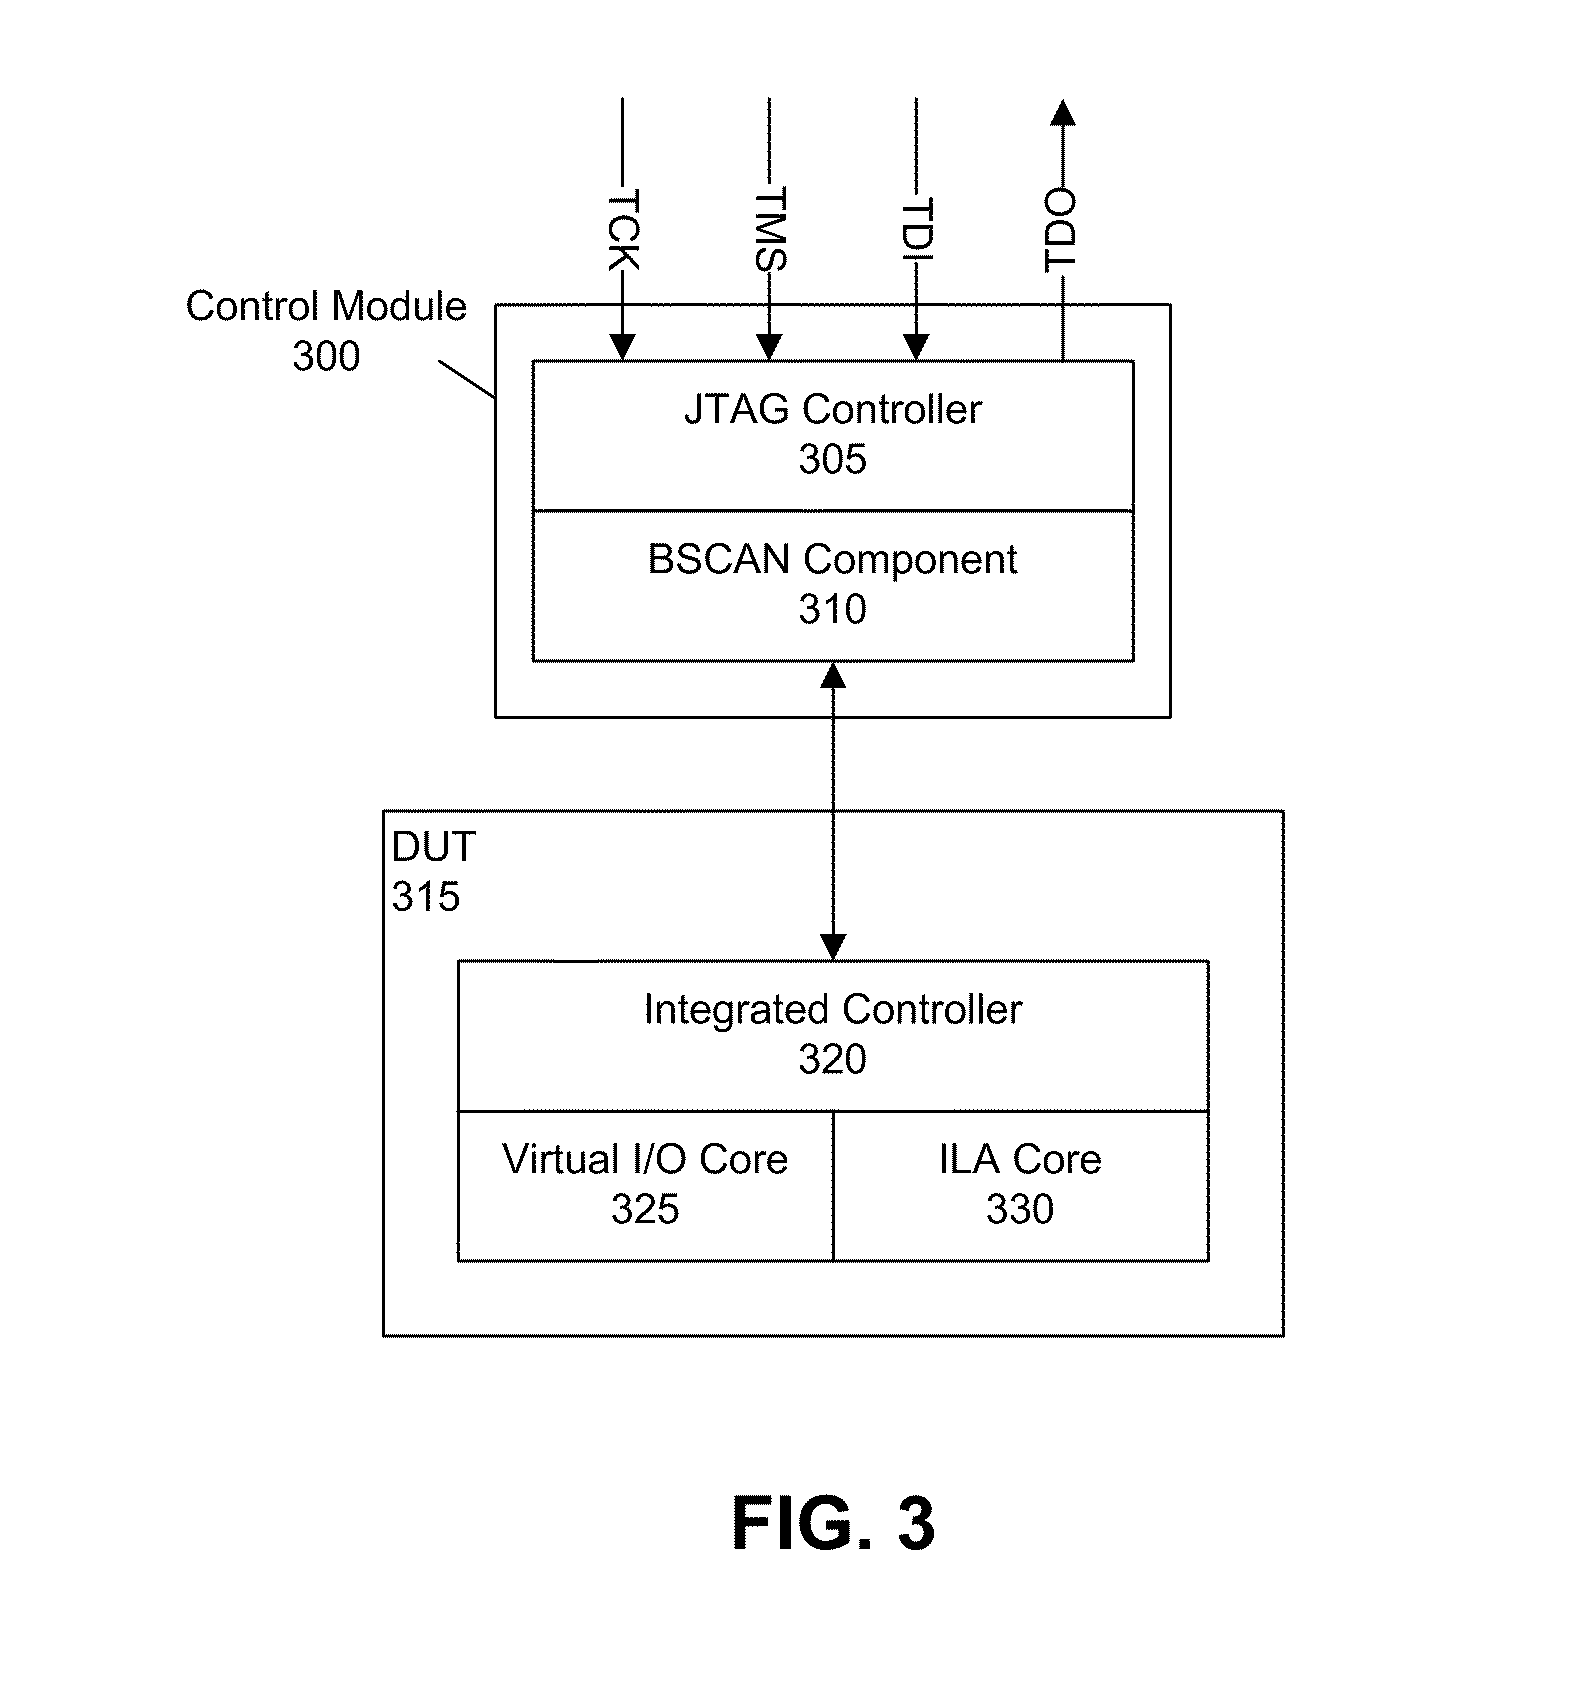 Generic software simulation interface for integrated circuits